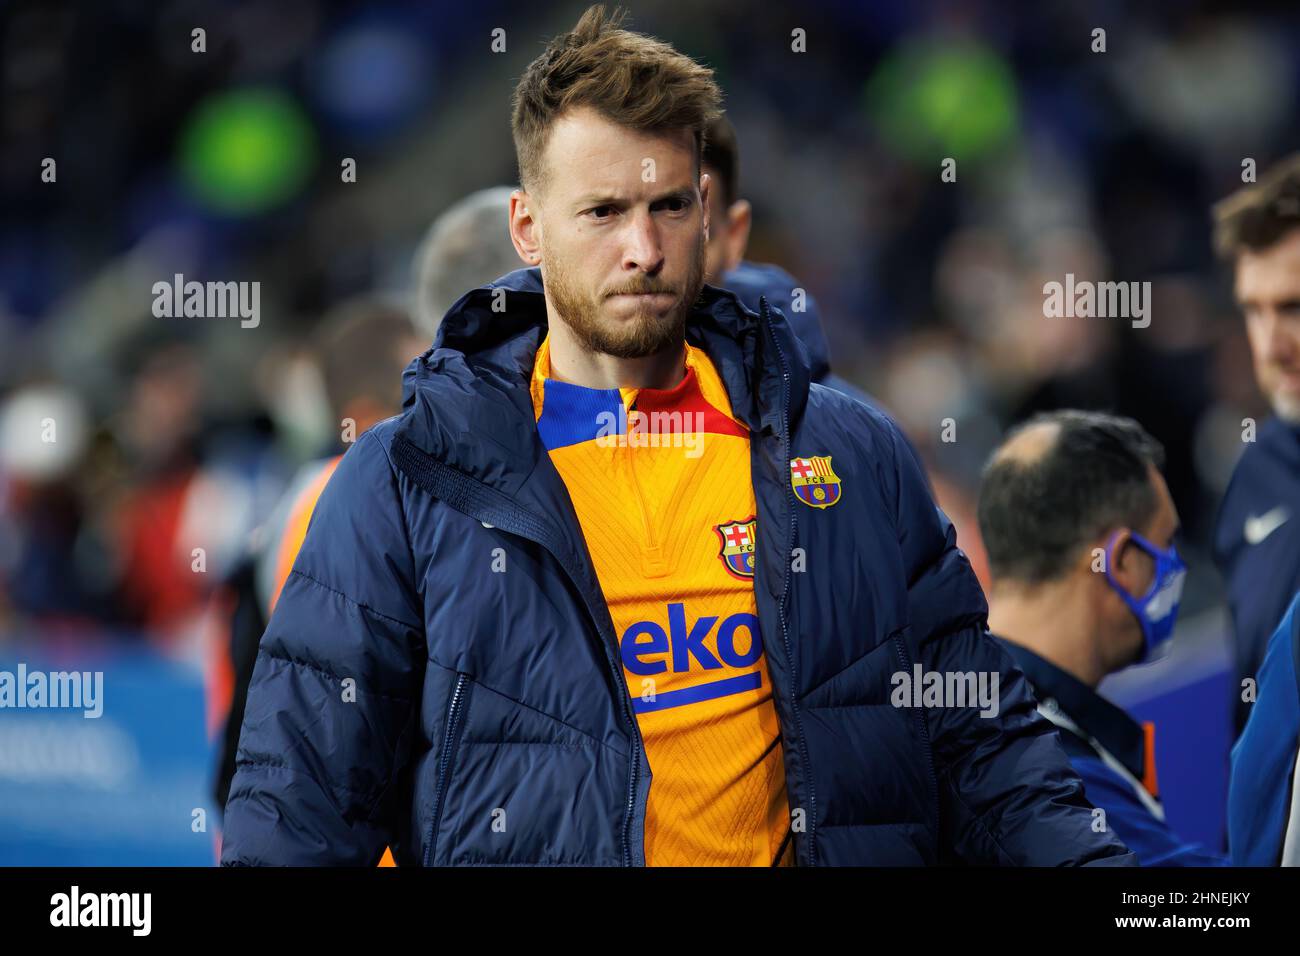 BARCELONA - FEB 13: Neto in the bench prior to the La Liga match between RCD Espanyol and FC Barcelona at the RCDE Stadium on February 13, 2022 in Bar Stock Photo